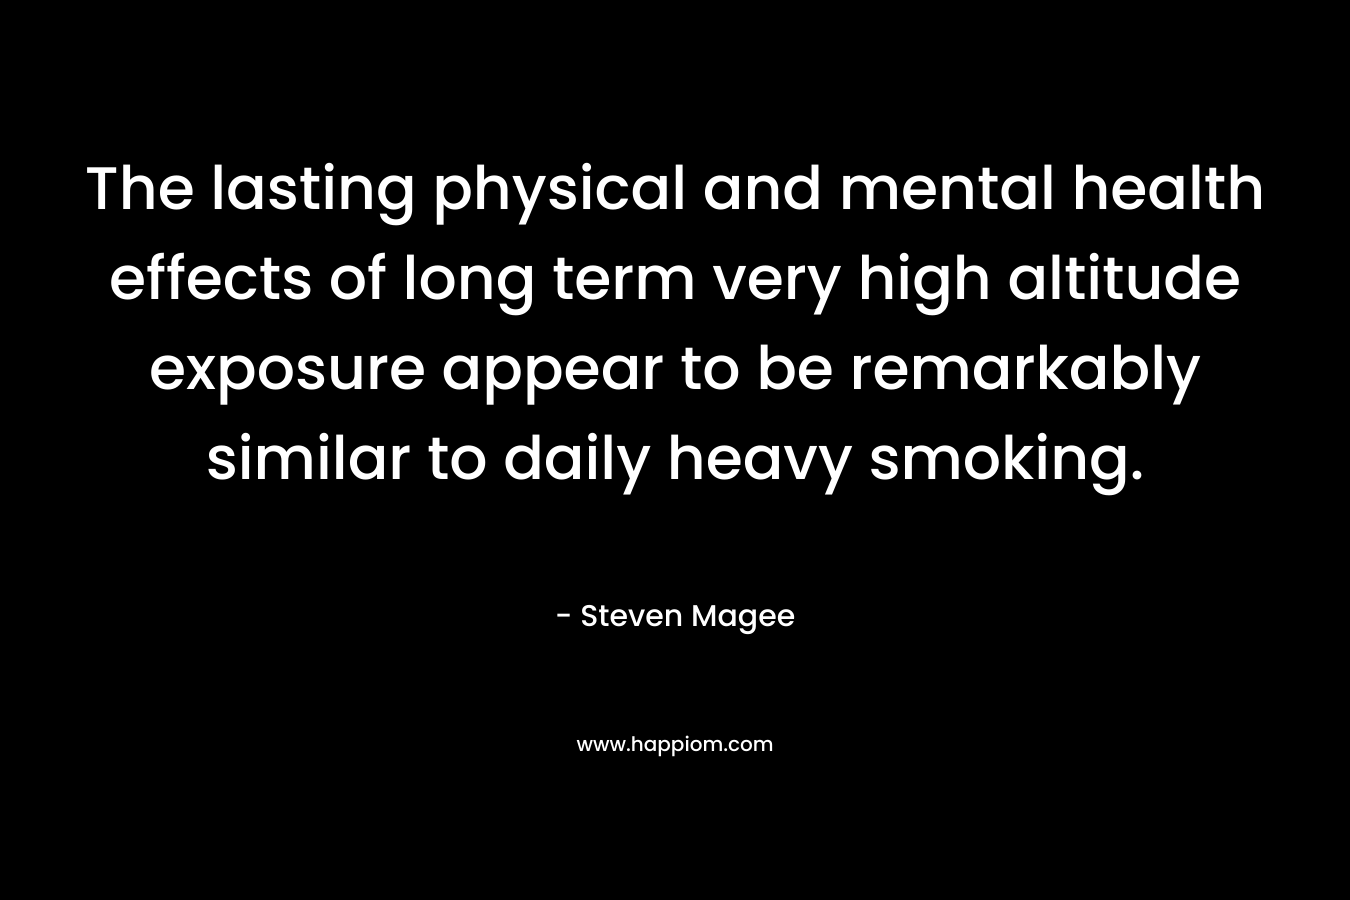 The lasting physical and mental health effects of long term very high altitude exposure appear to be remarkably similar to daily heavy smoking. – Steven Magee